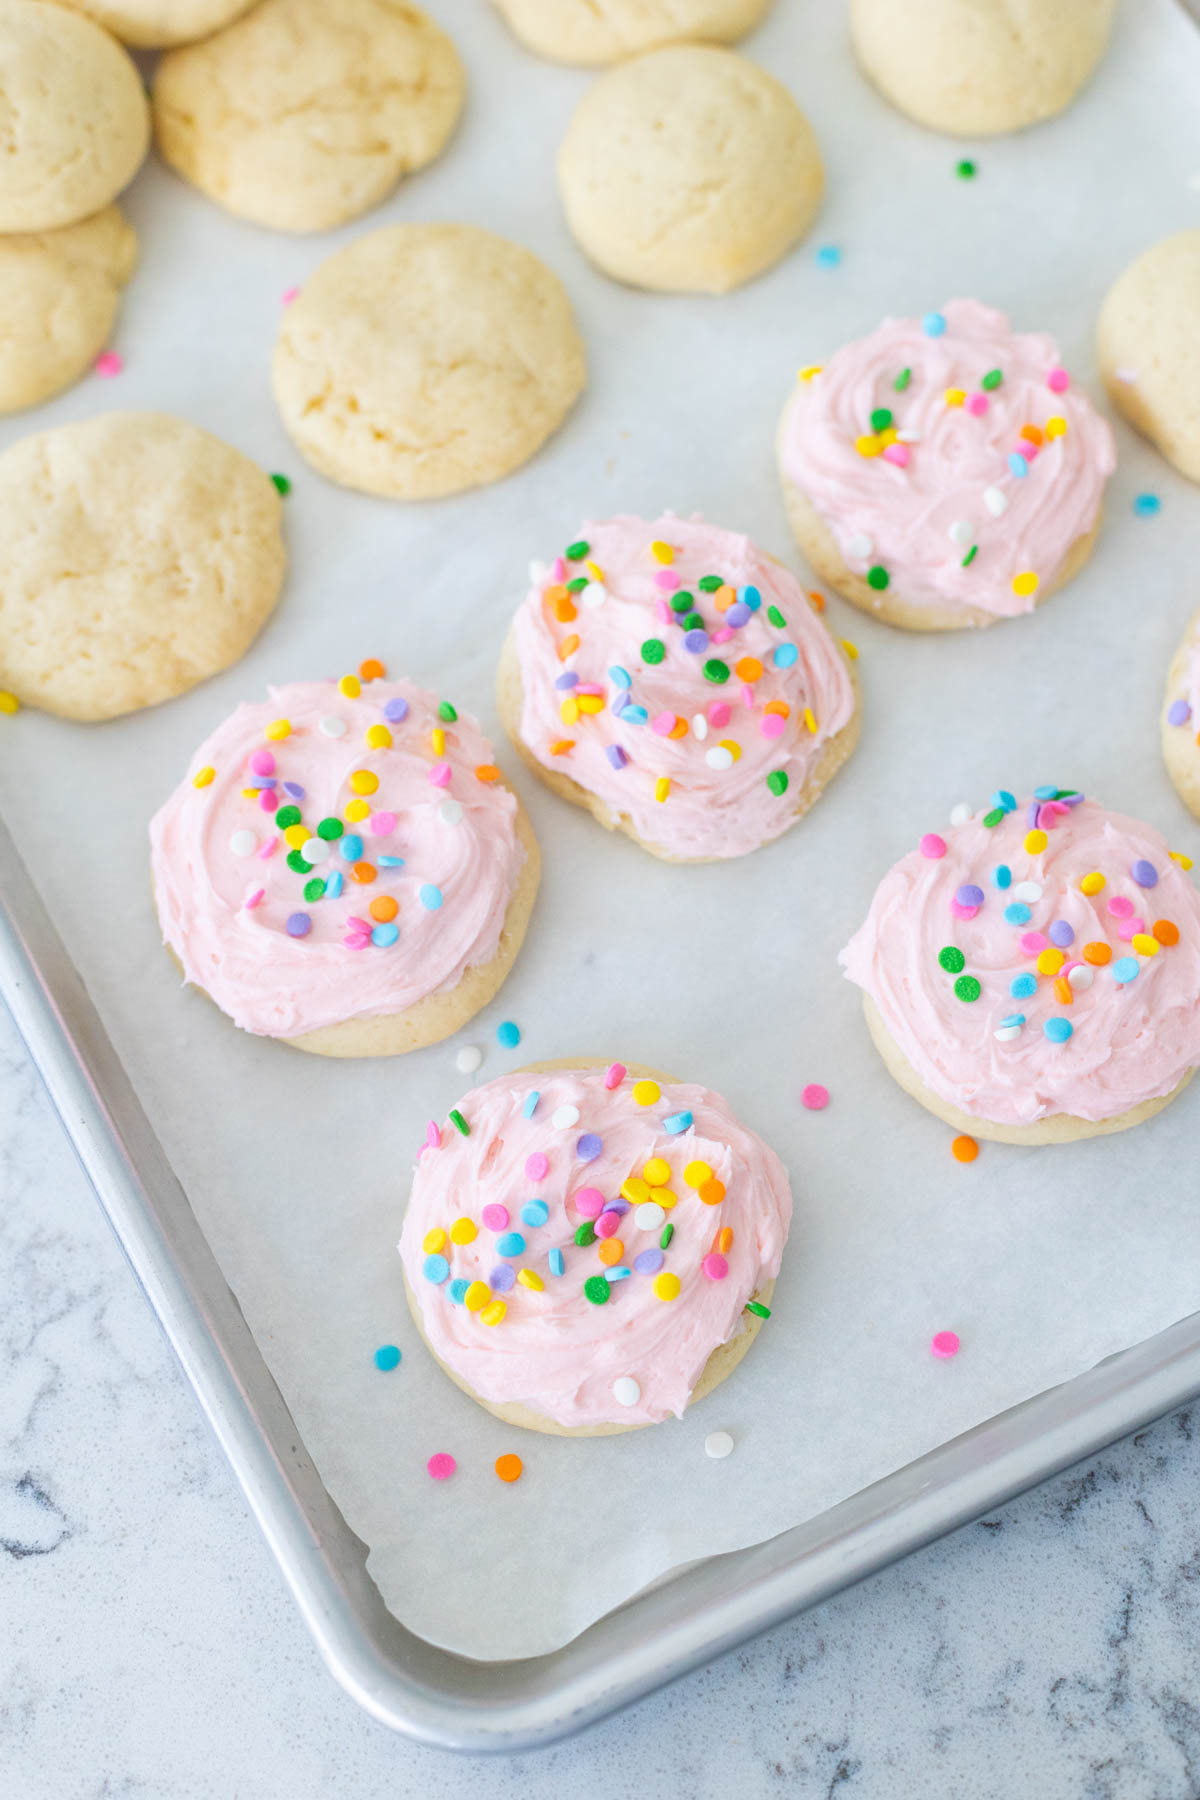 A baking sheet of sugar cookies shows half of them frosted with sprinkles and half of them plain.